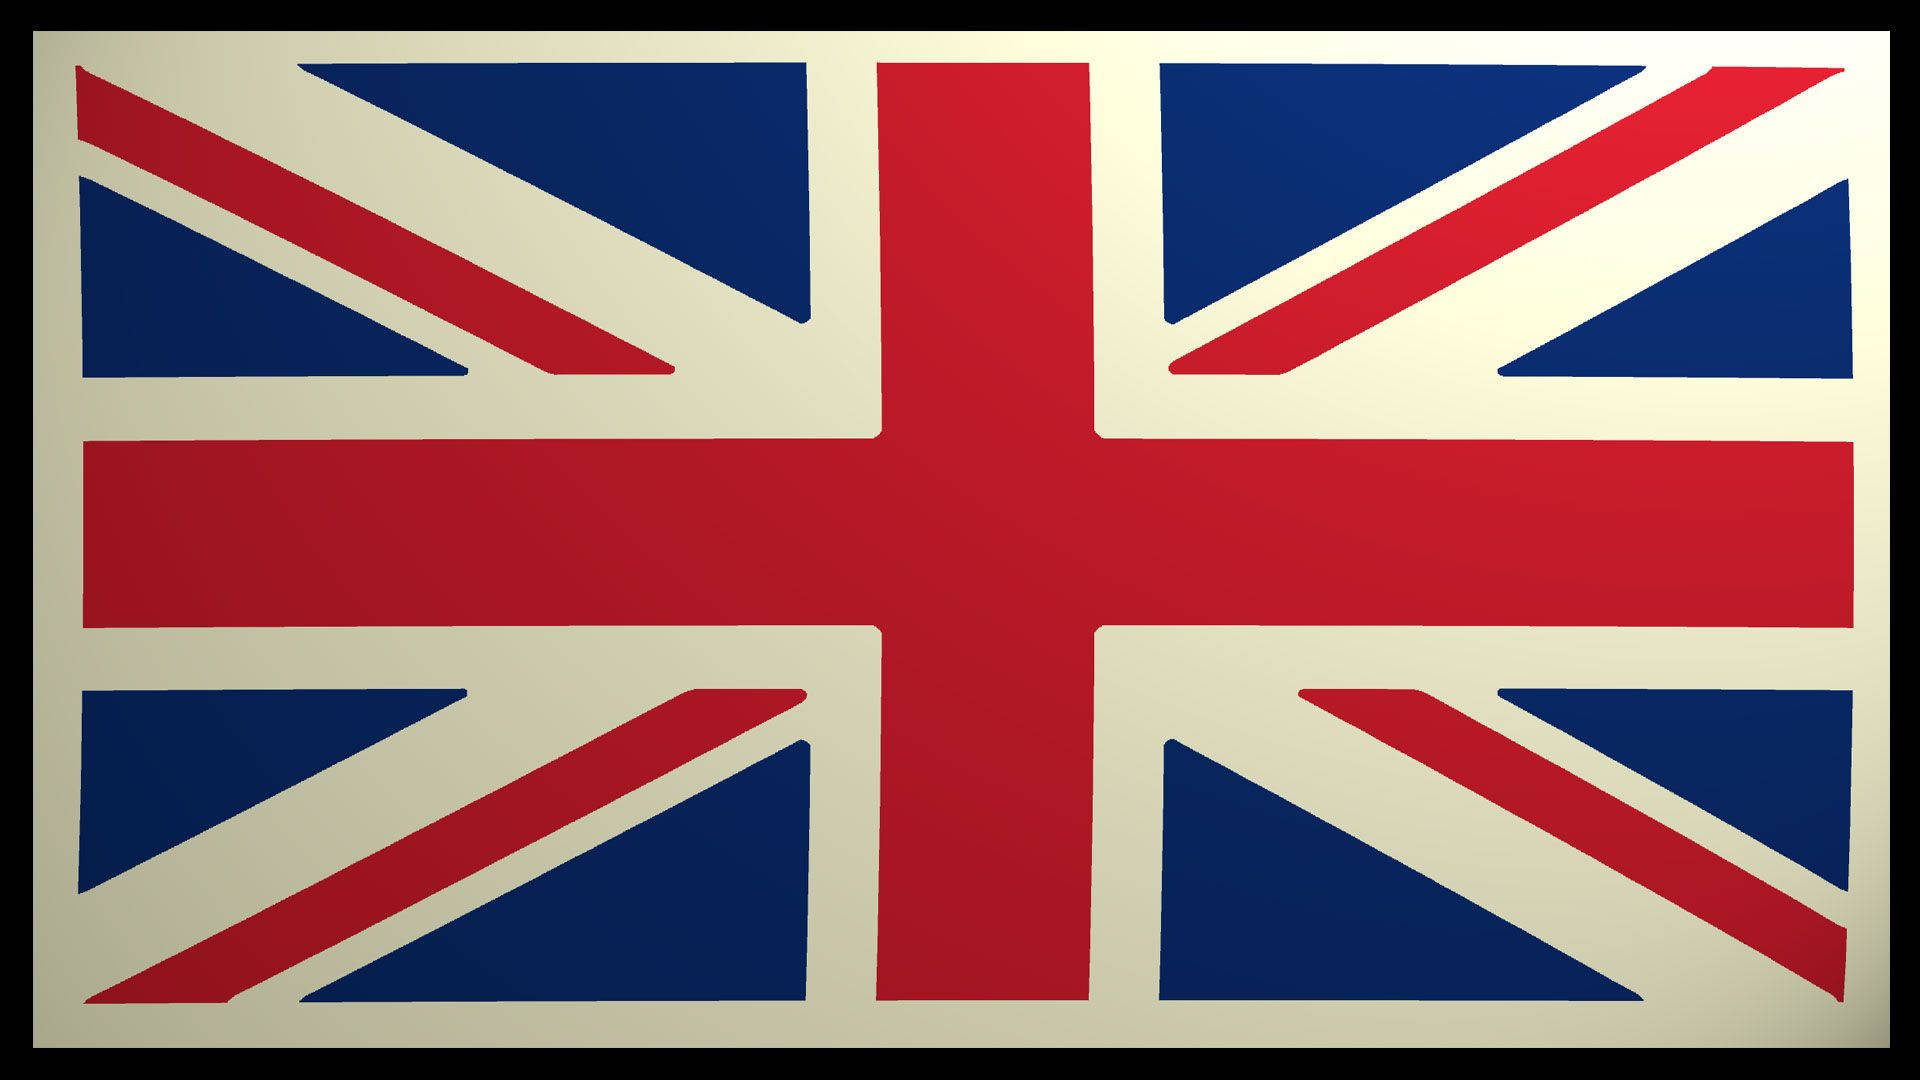 1920x1080 Download Perspective Photo Of United Kingdom Flag Wallpaper